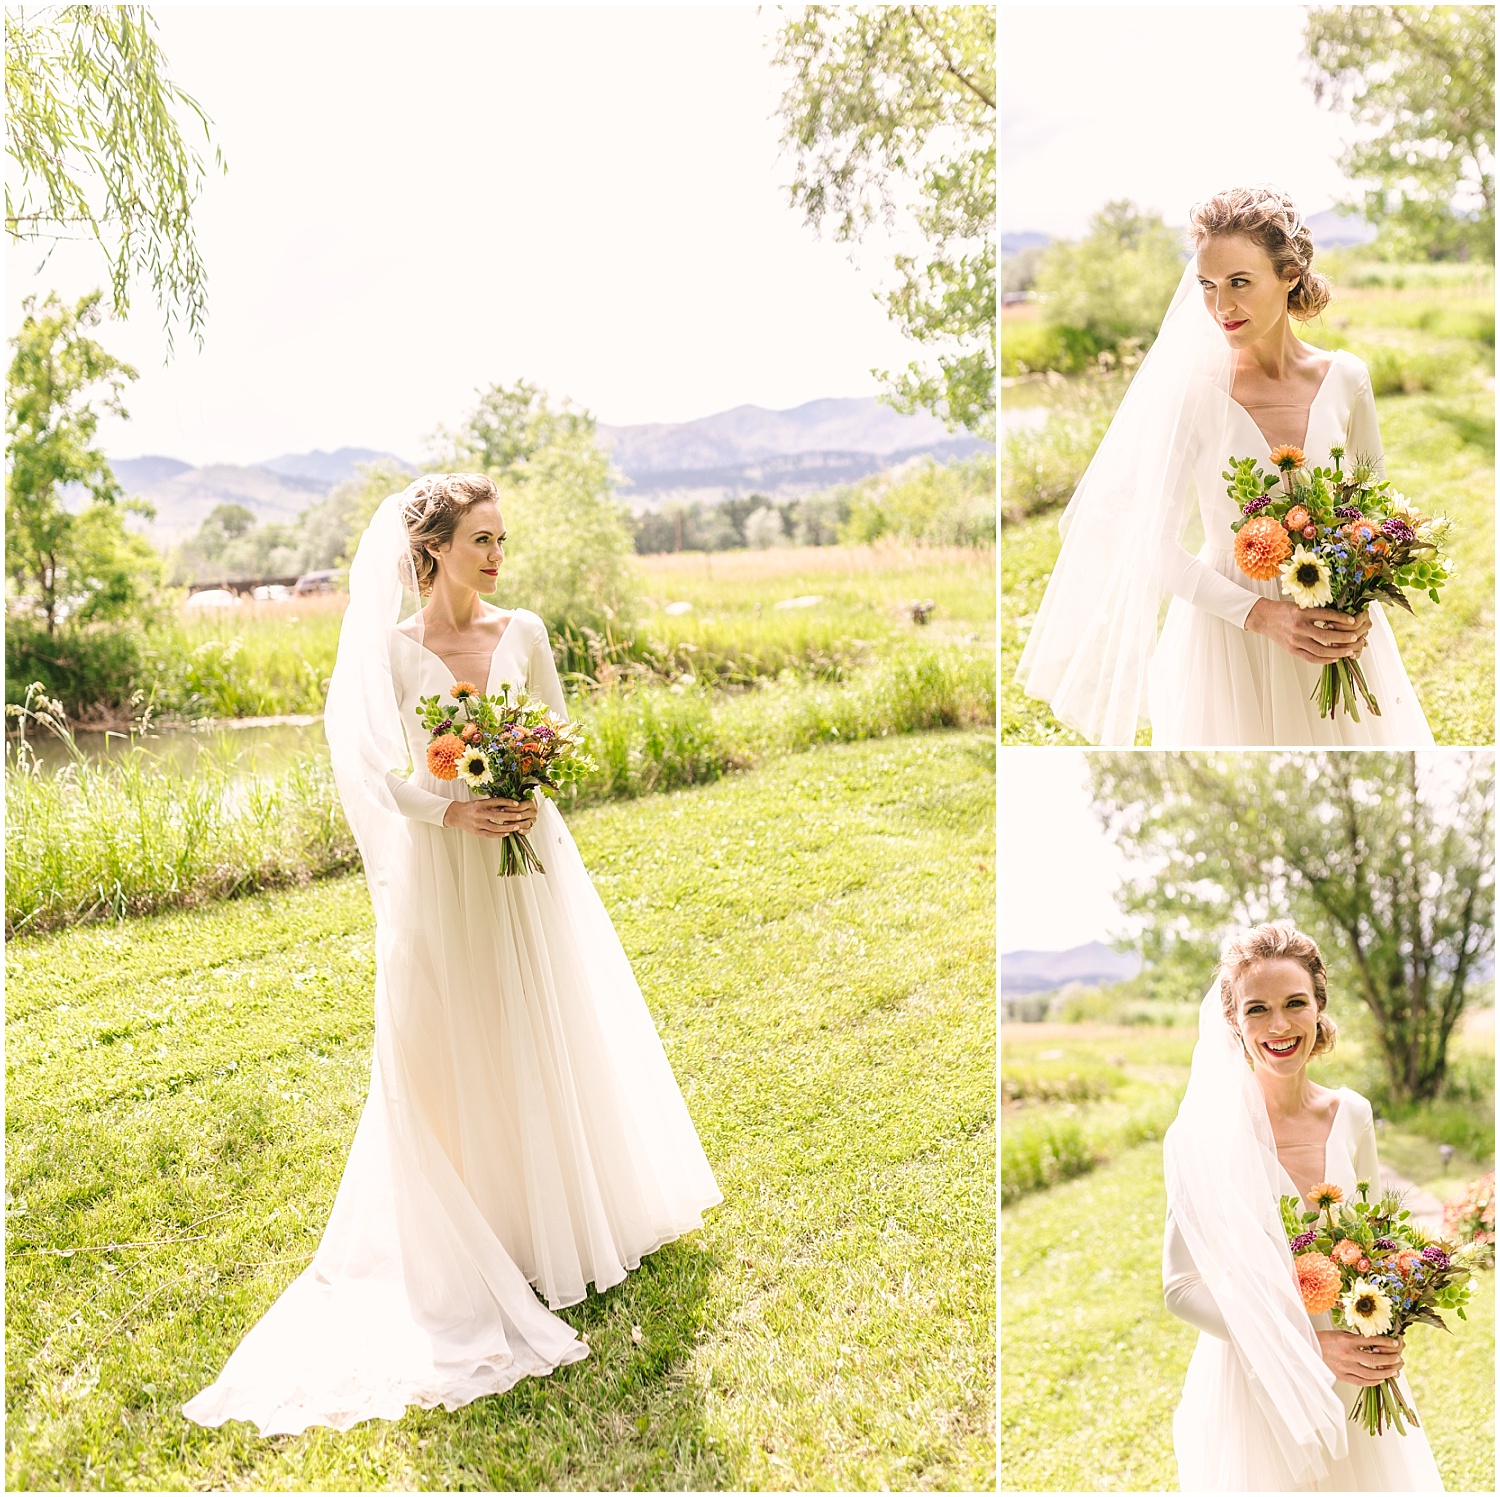 Bride wearing long veil and rustic bouquet under the willow tree at Pastures of Plenty wedding